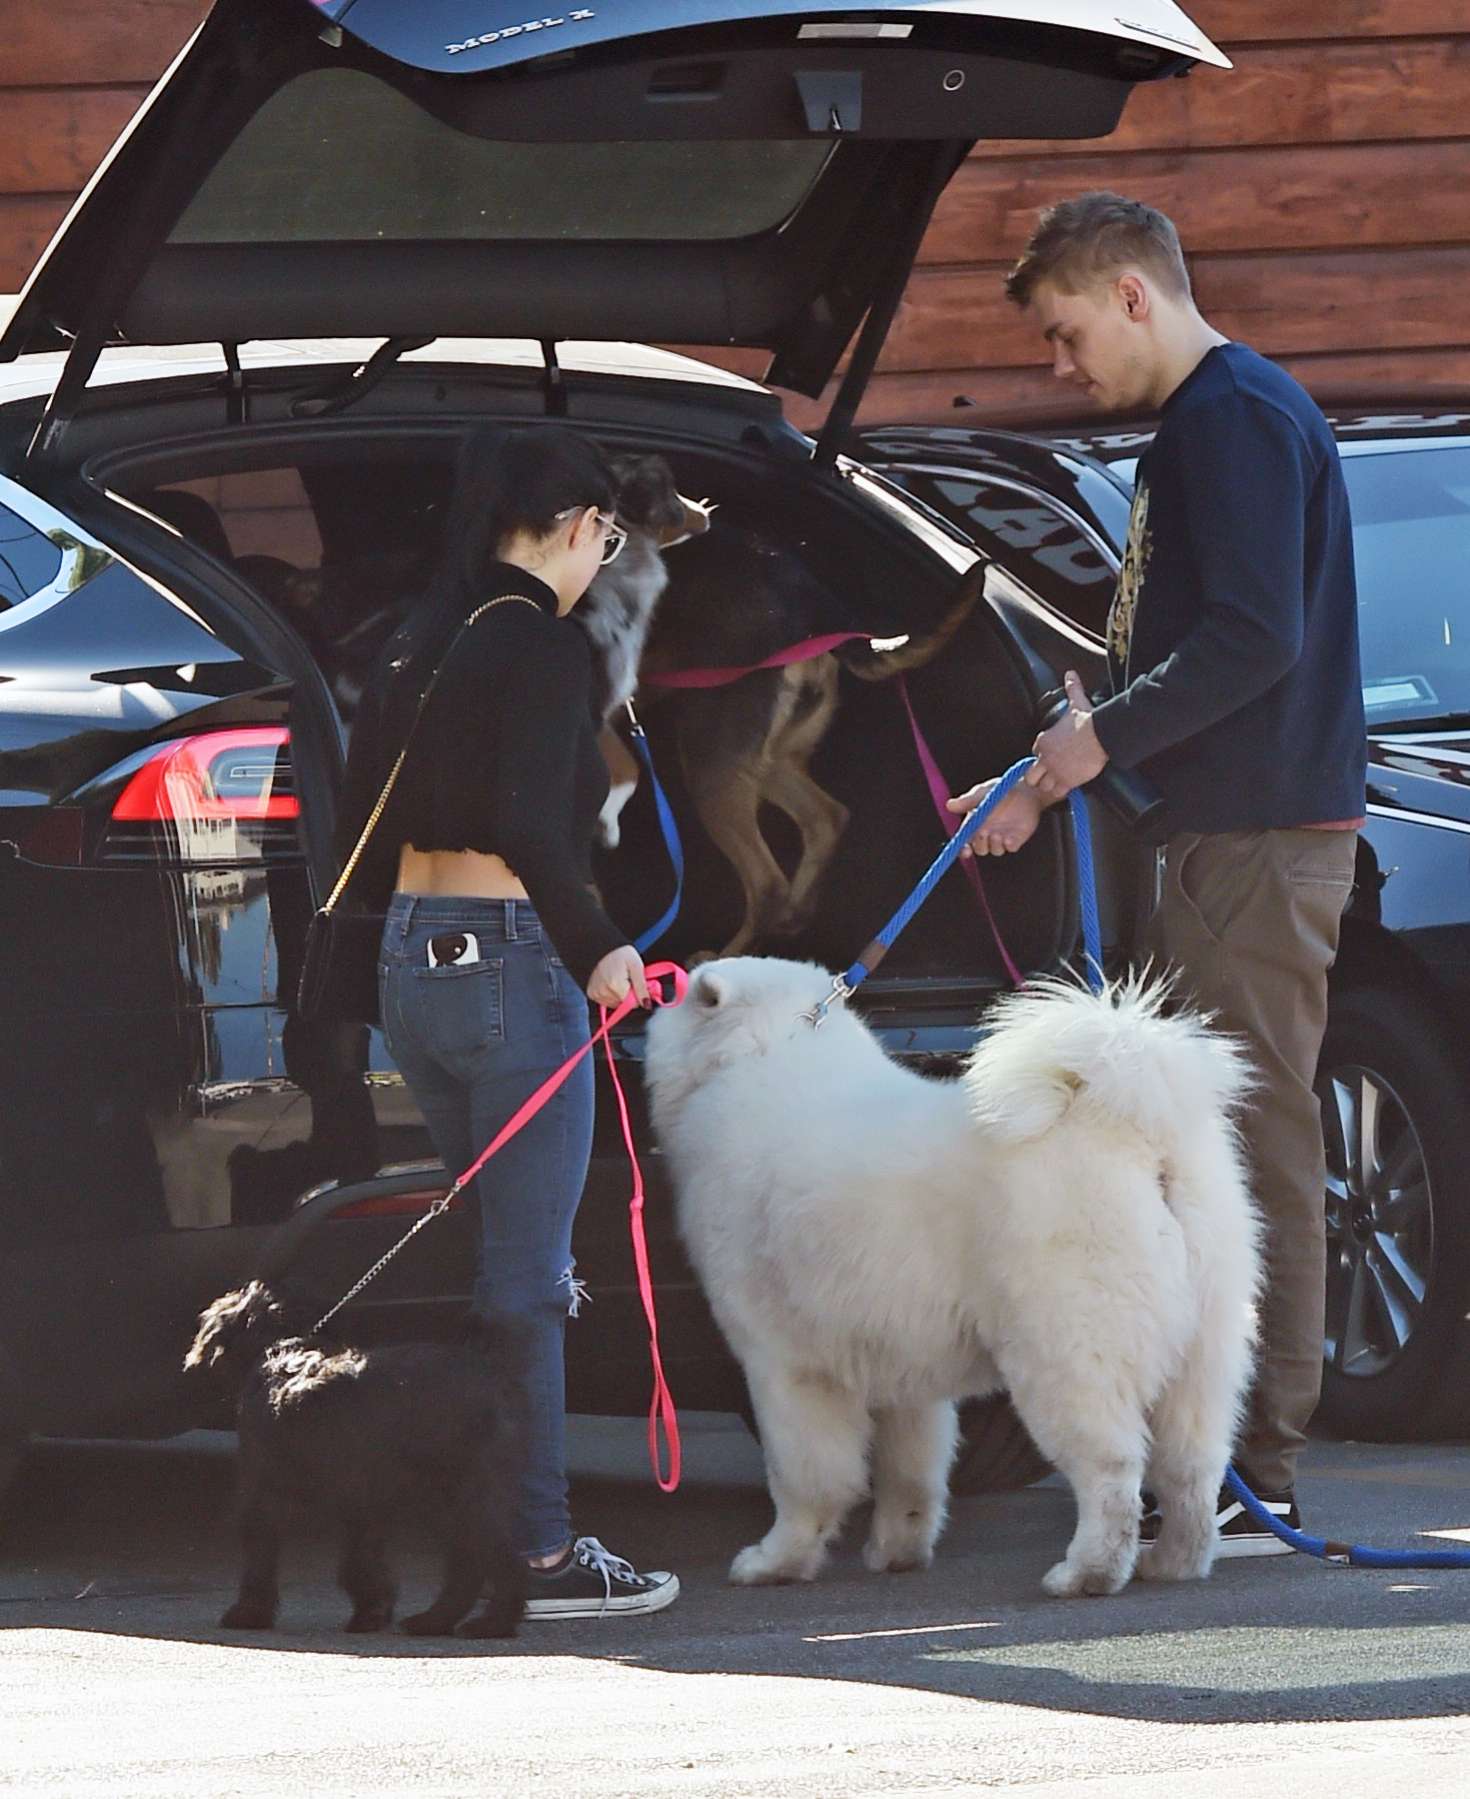 Ariel Winter and Levi Meaden take their dogs to the veterinarian in LA